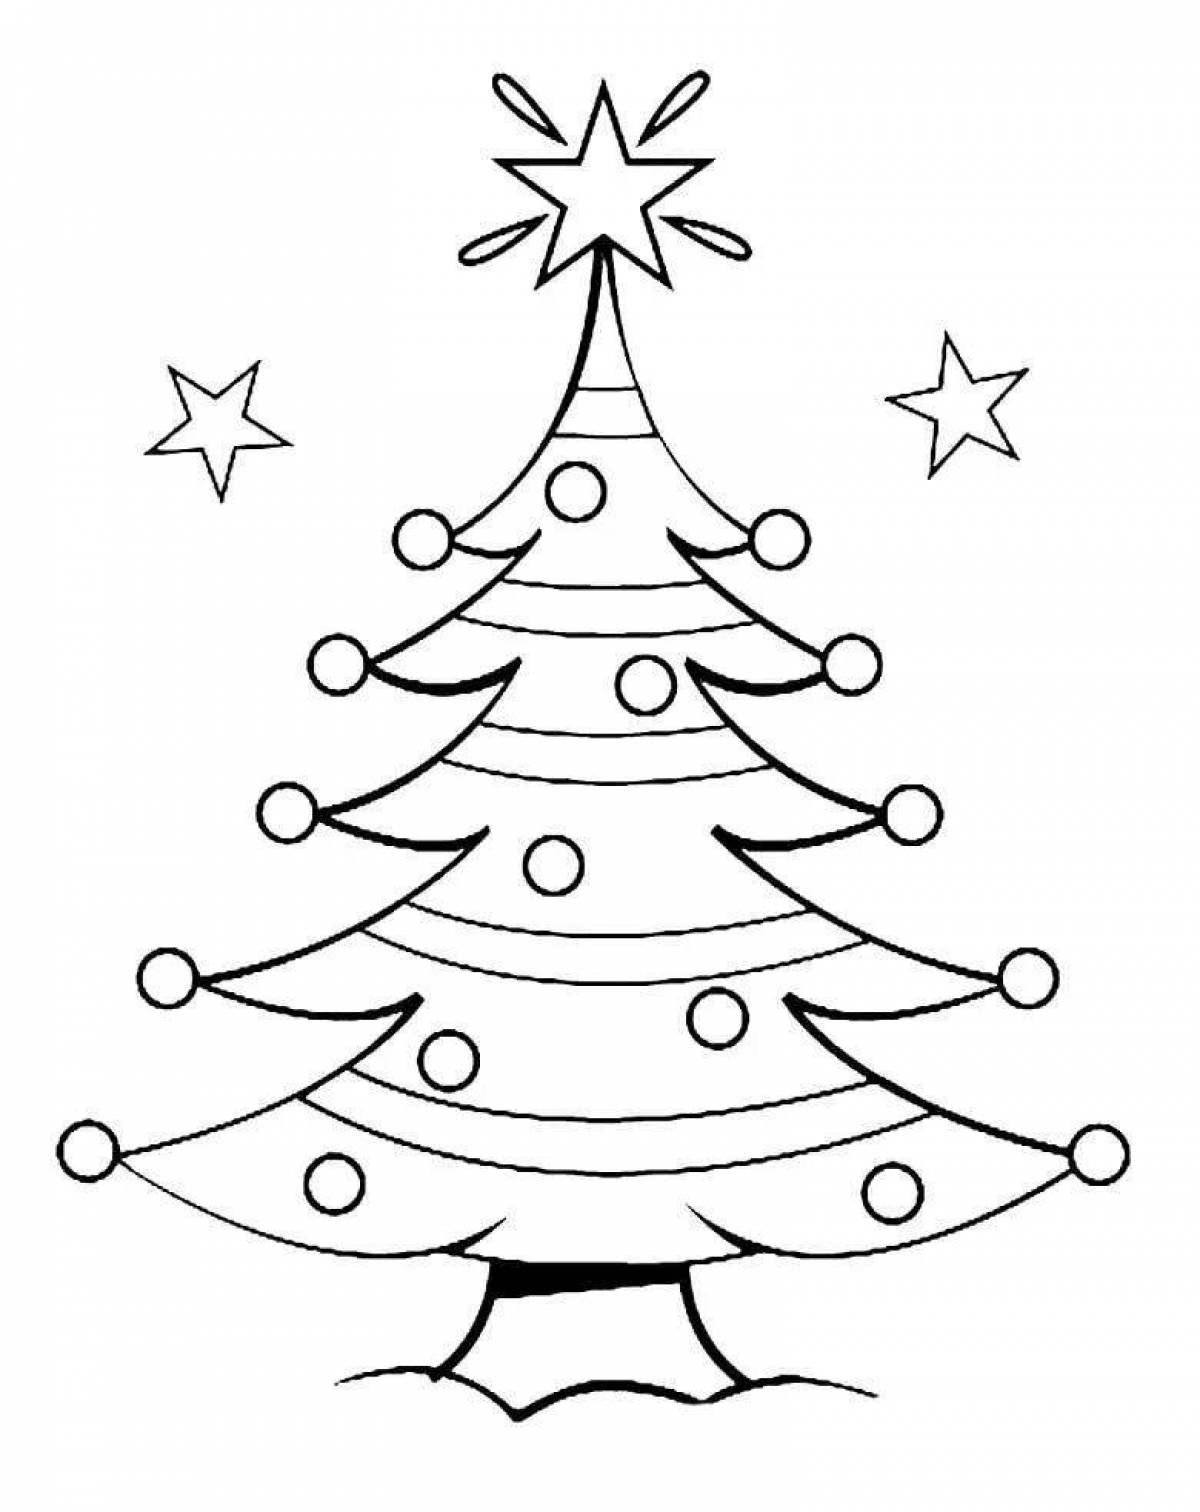 Gorgeous coloring Christmas tree template